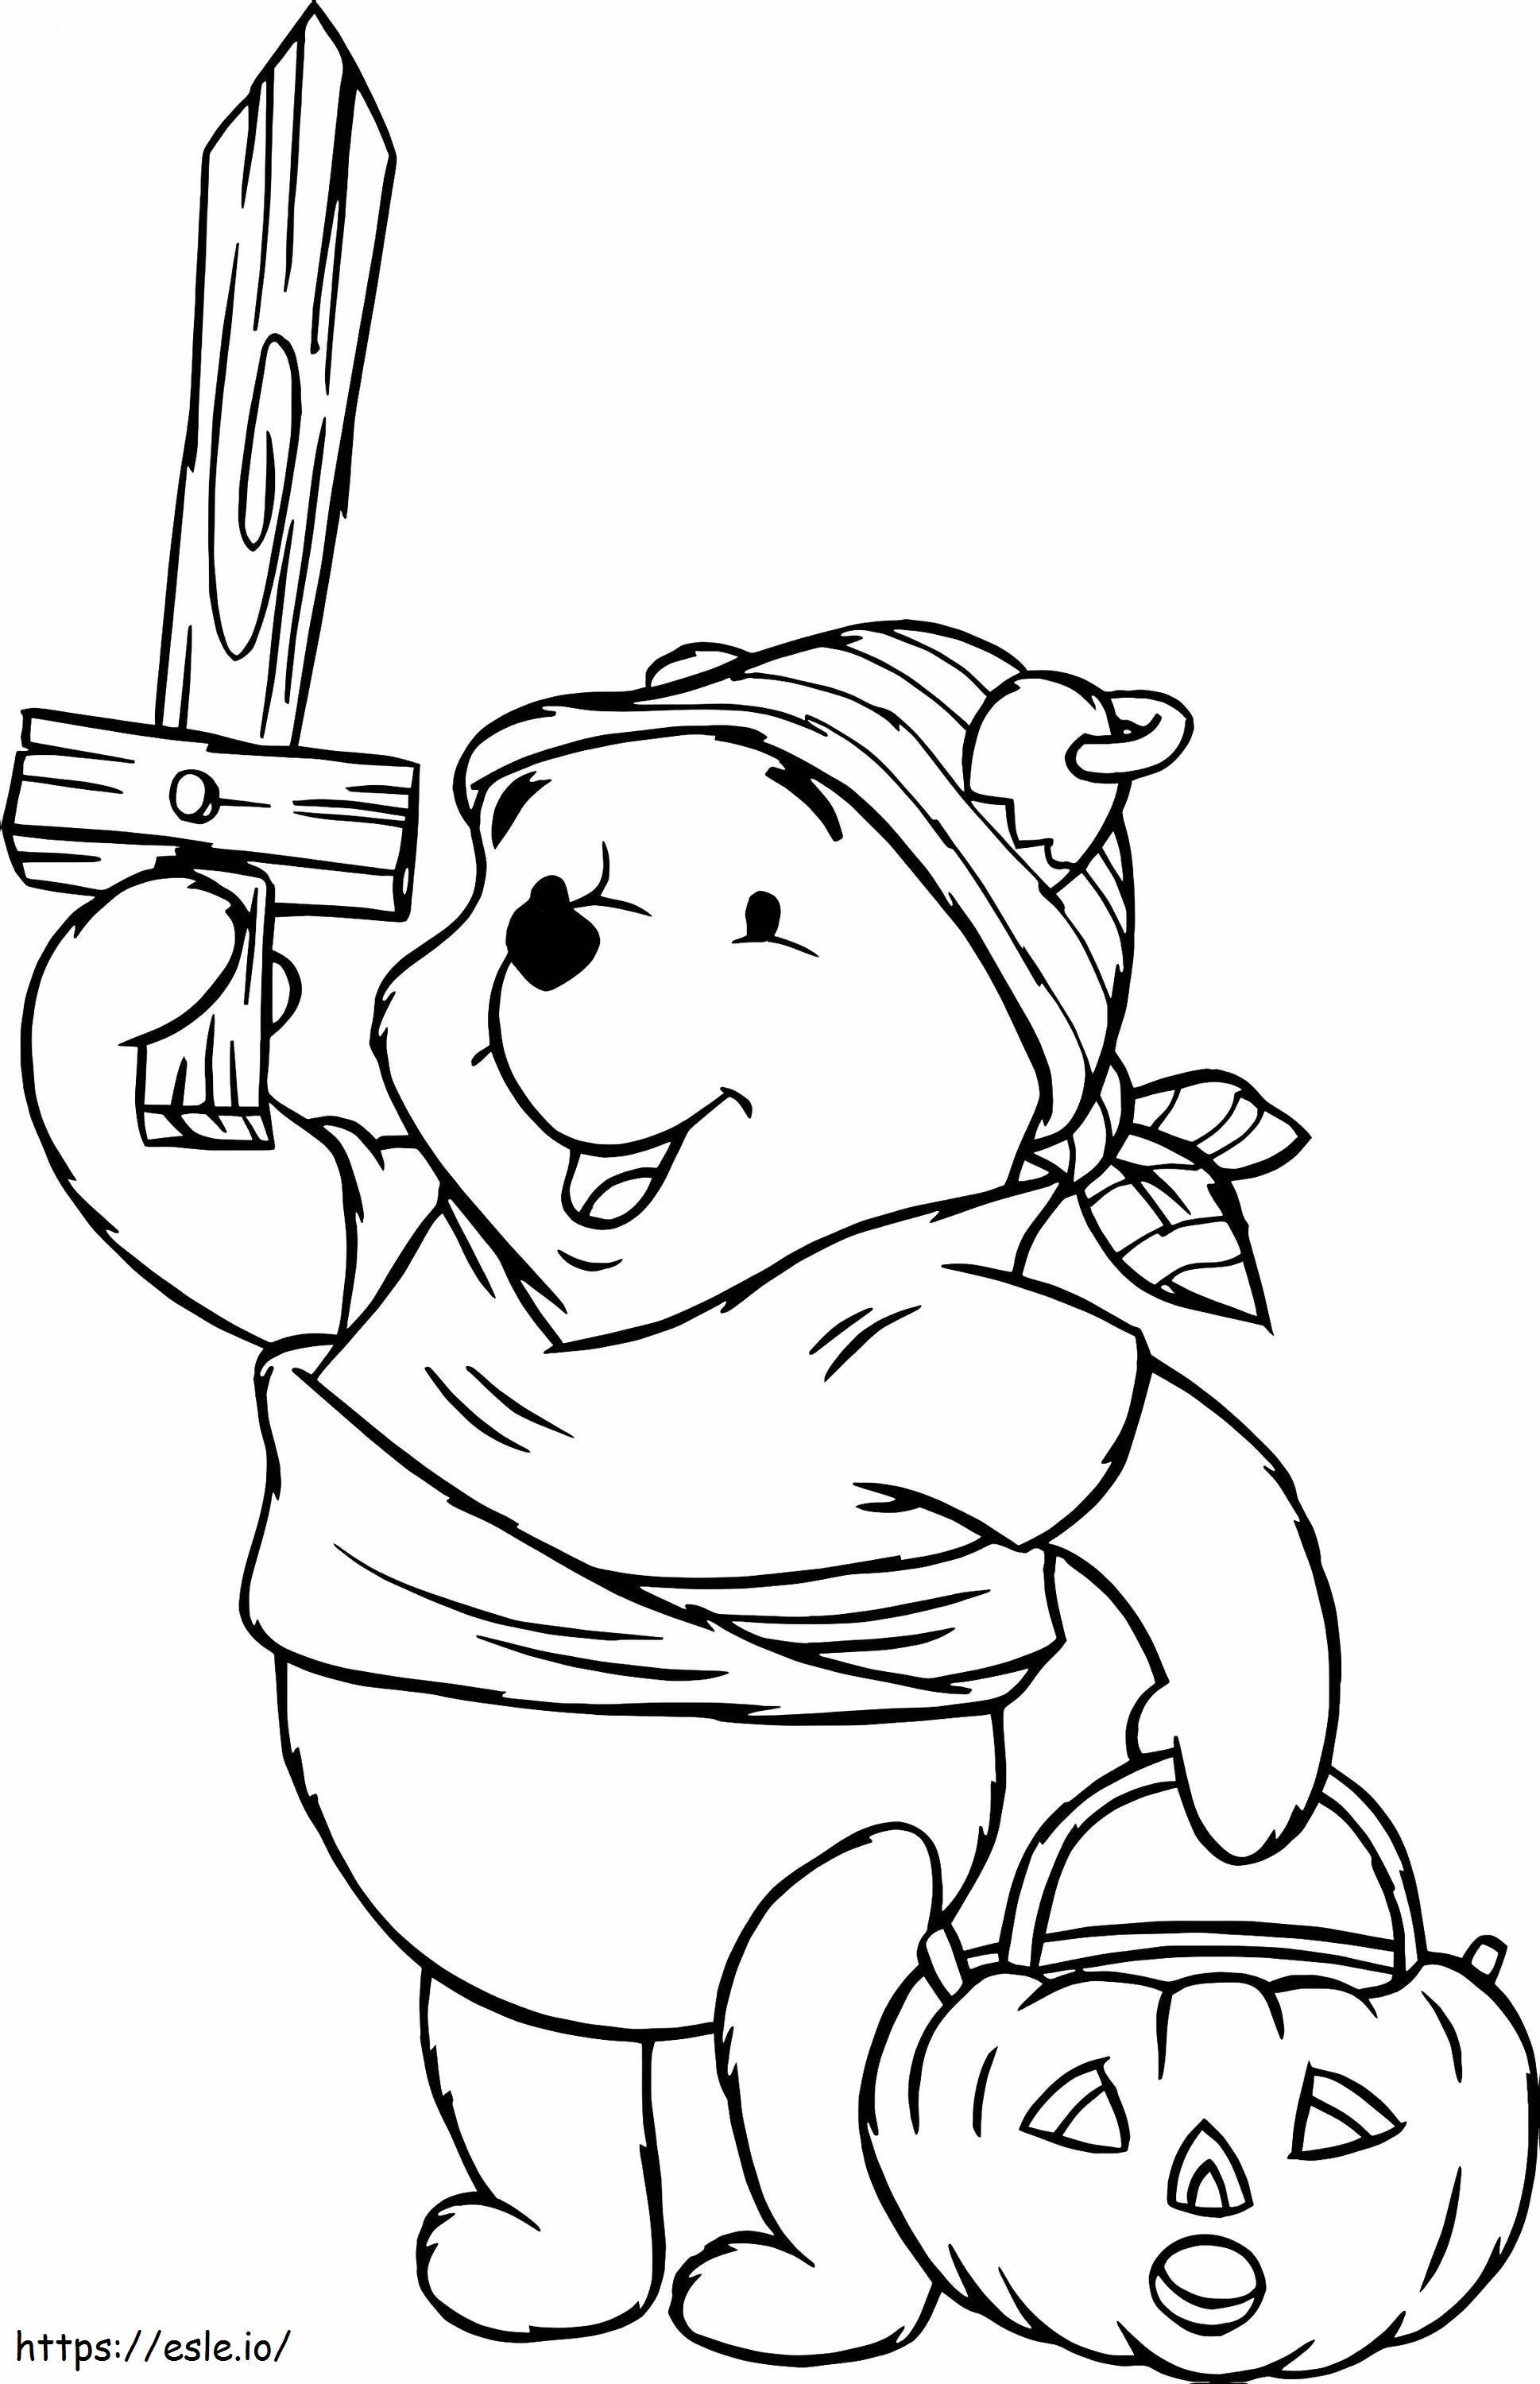 Pirate Winnie The Pooh coloring page